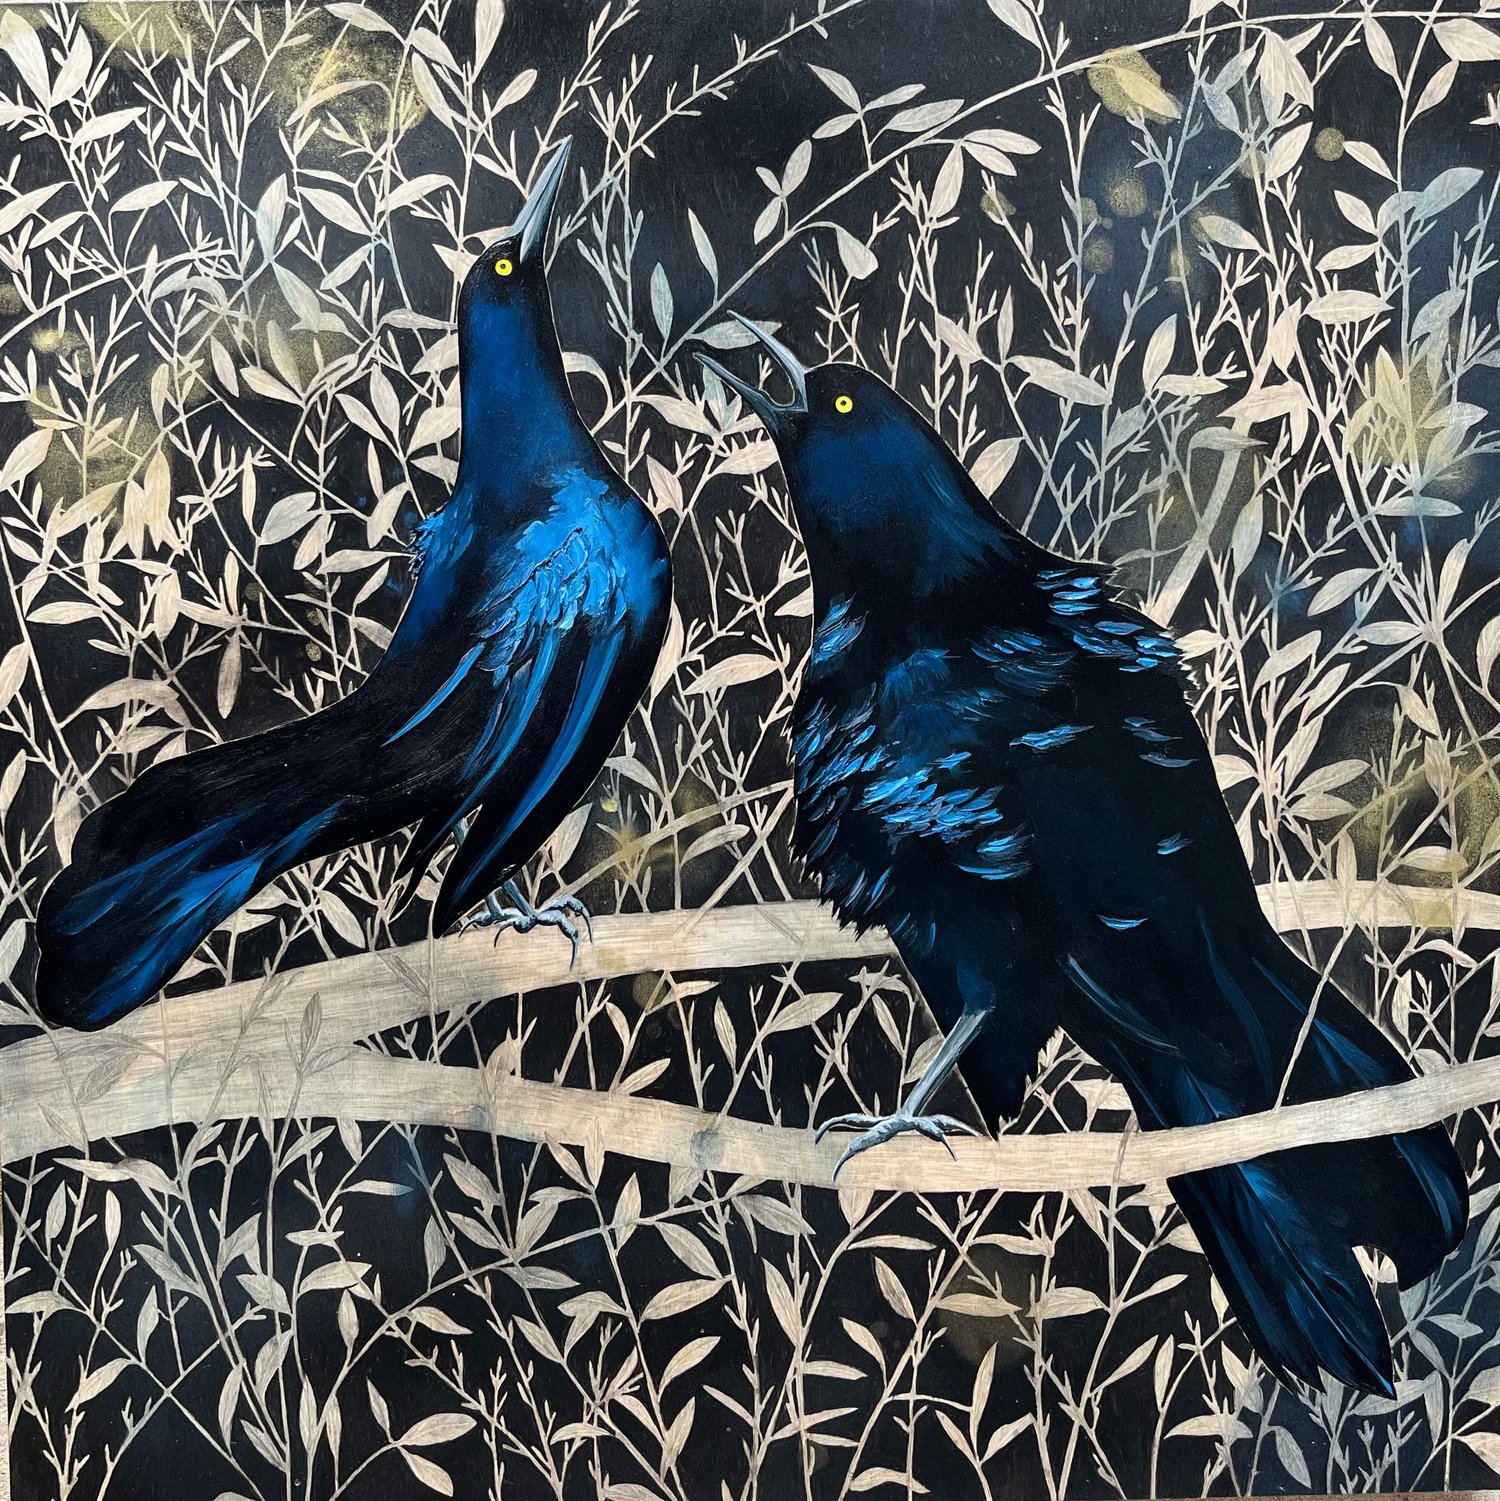 Aries Sun, Grackle Moon by Carly Weaver - Original Painting